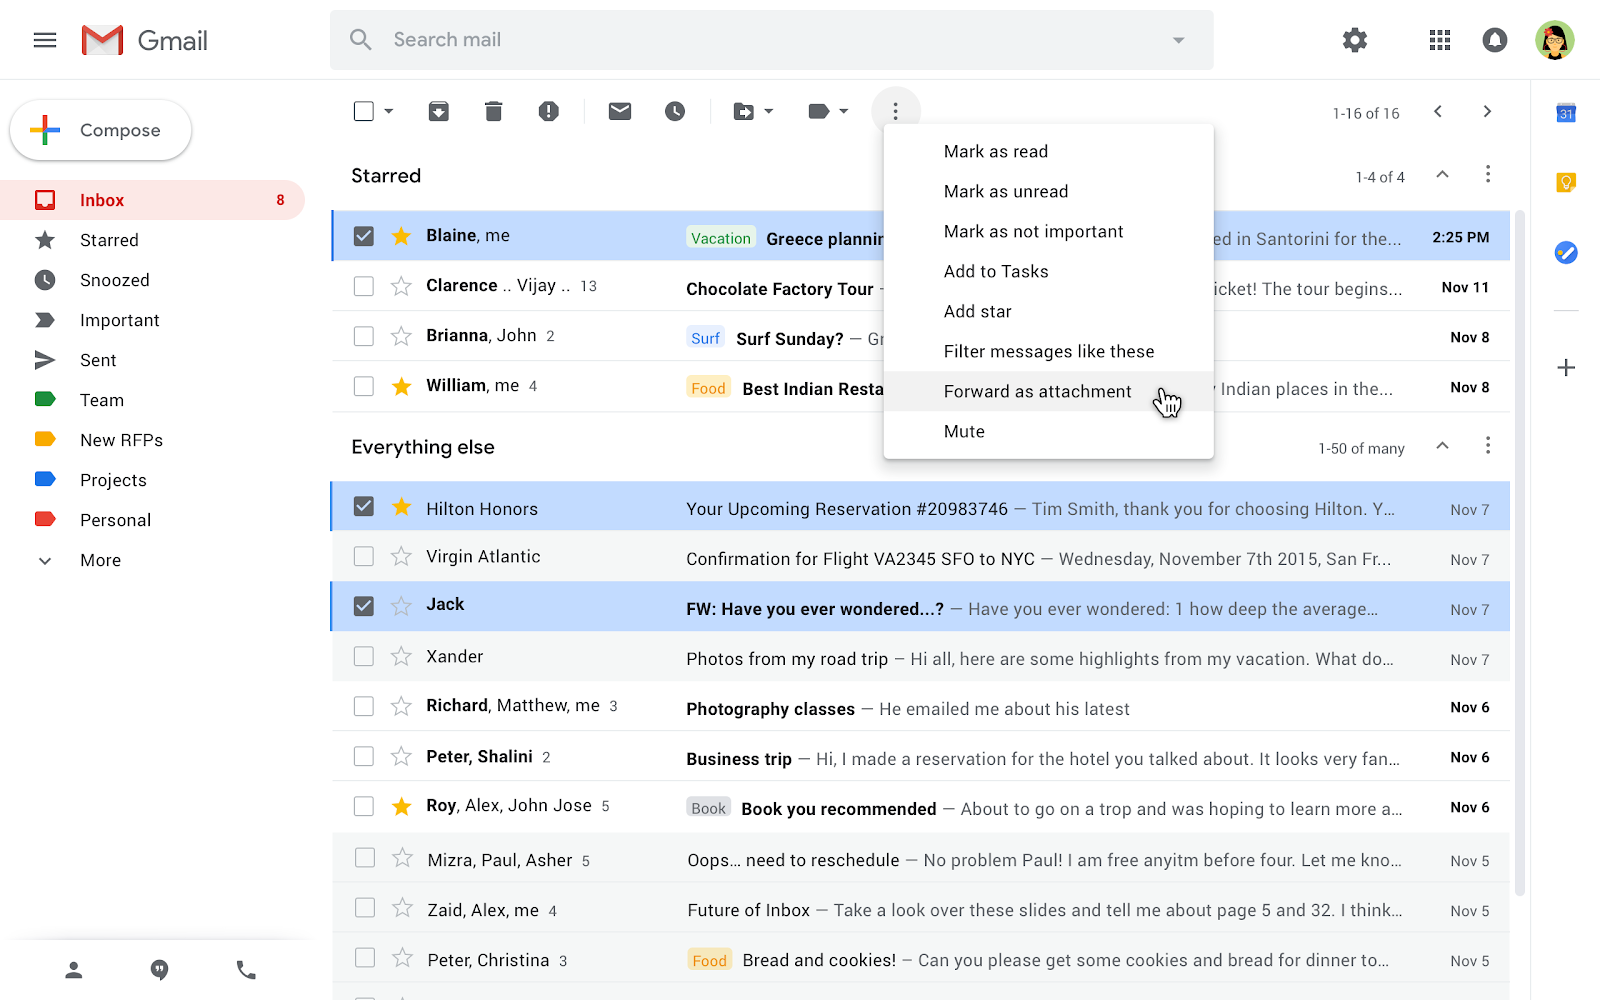 Screenshot of how to add email to an email via "Forward as Attachment" feature in Gmail